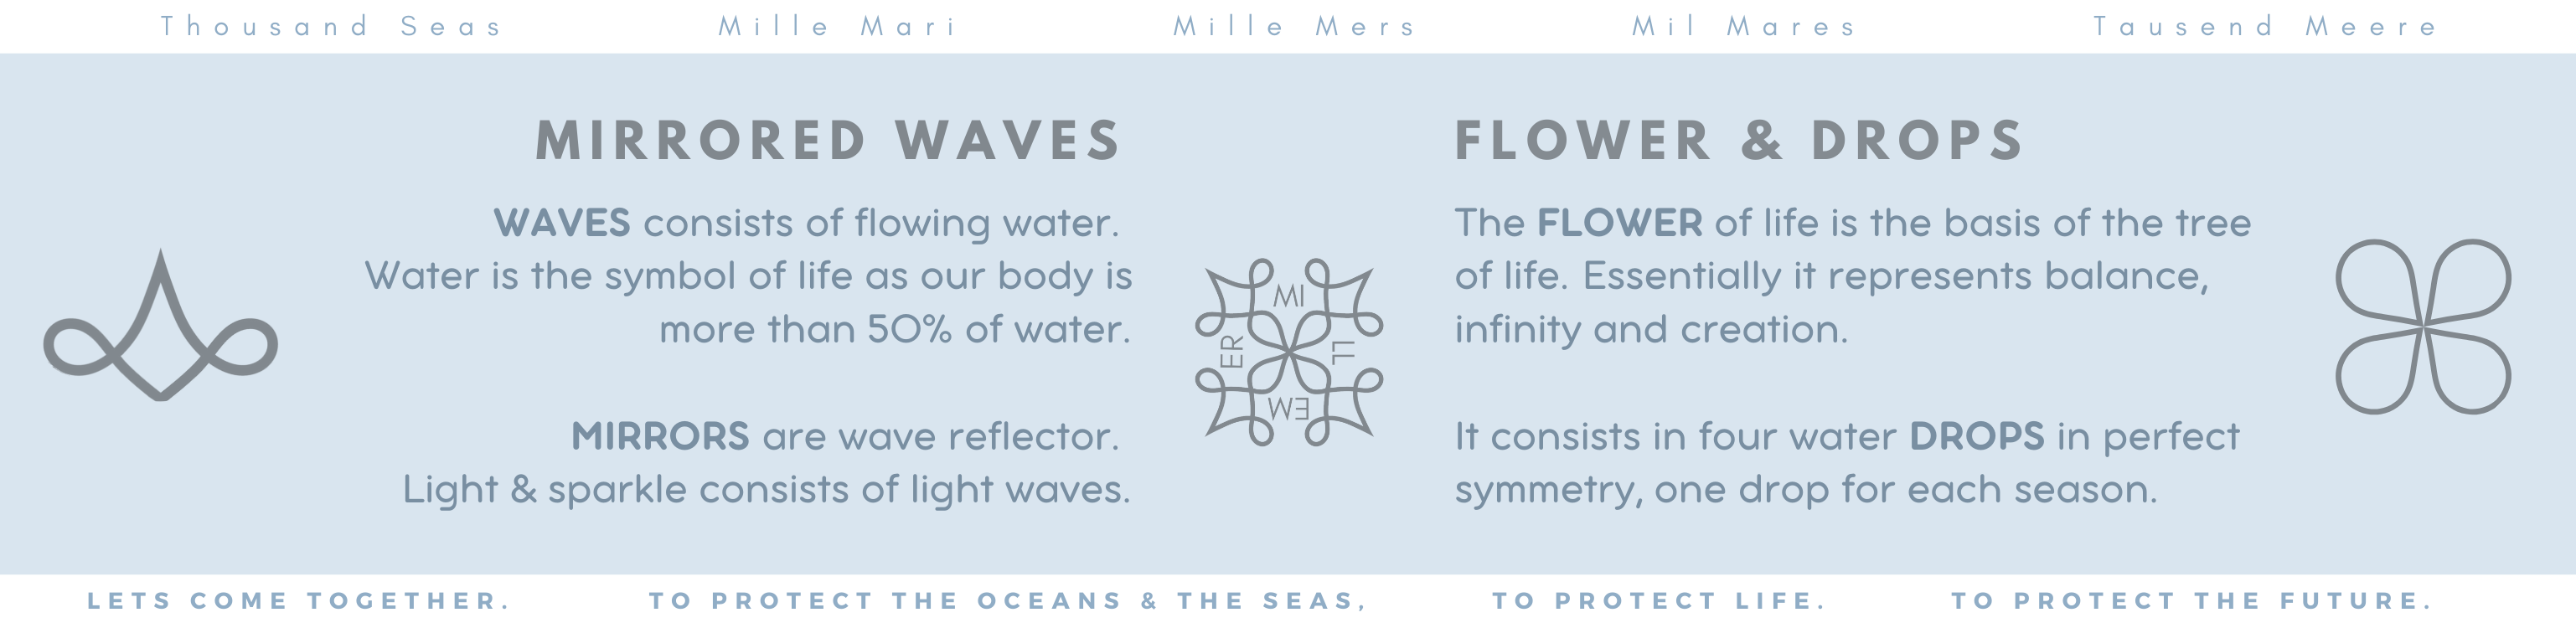 About-us-millemer-wallpaper-jewelry-brand-ocean-sea-inspired-logo-symbolism